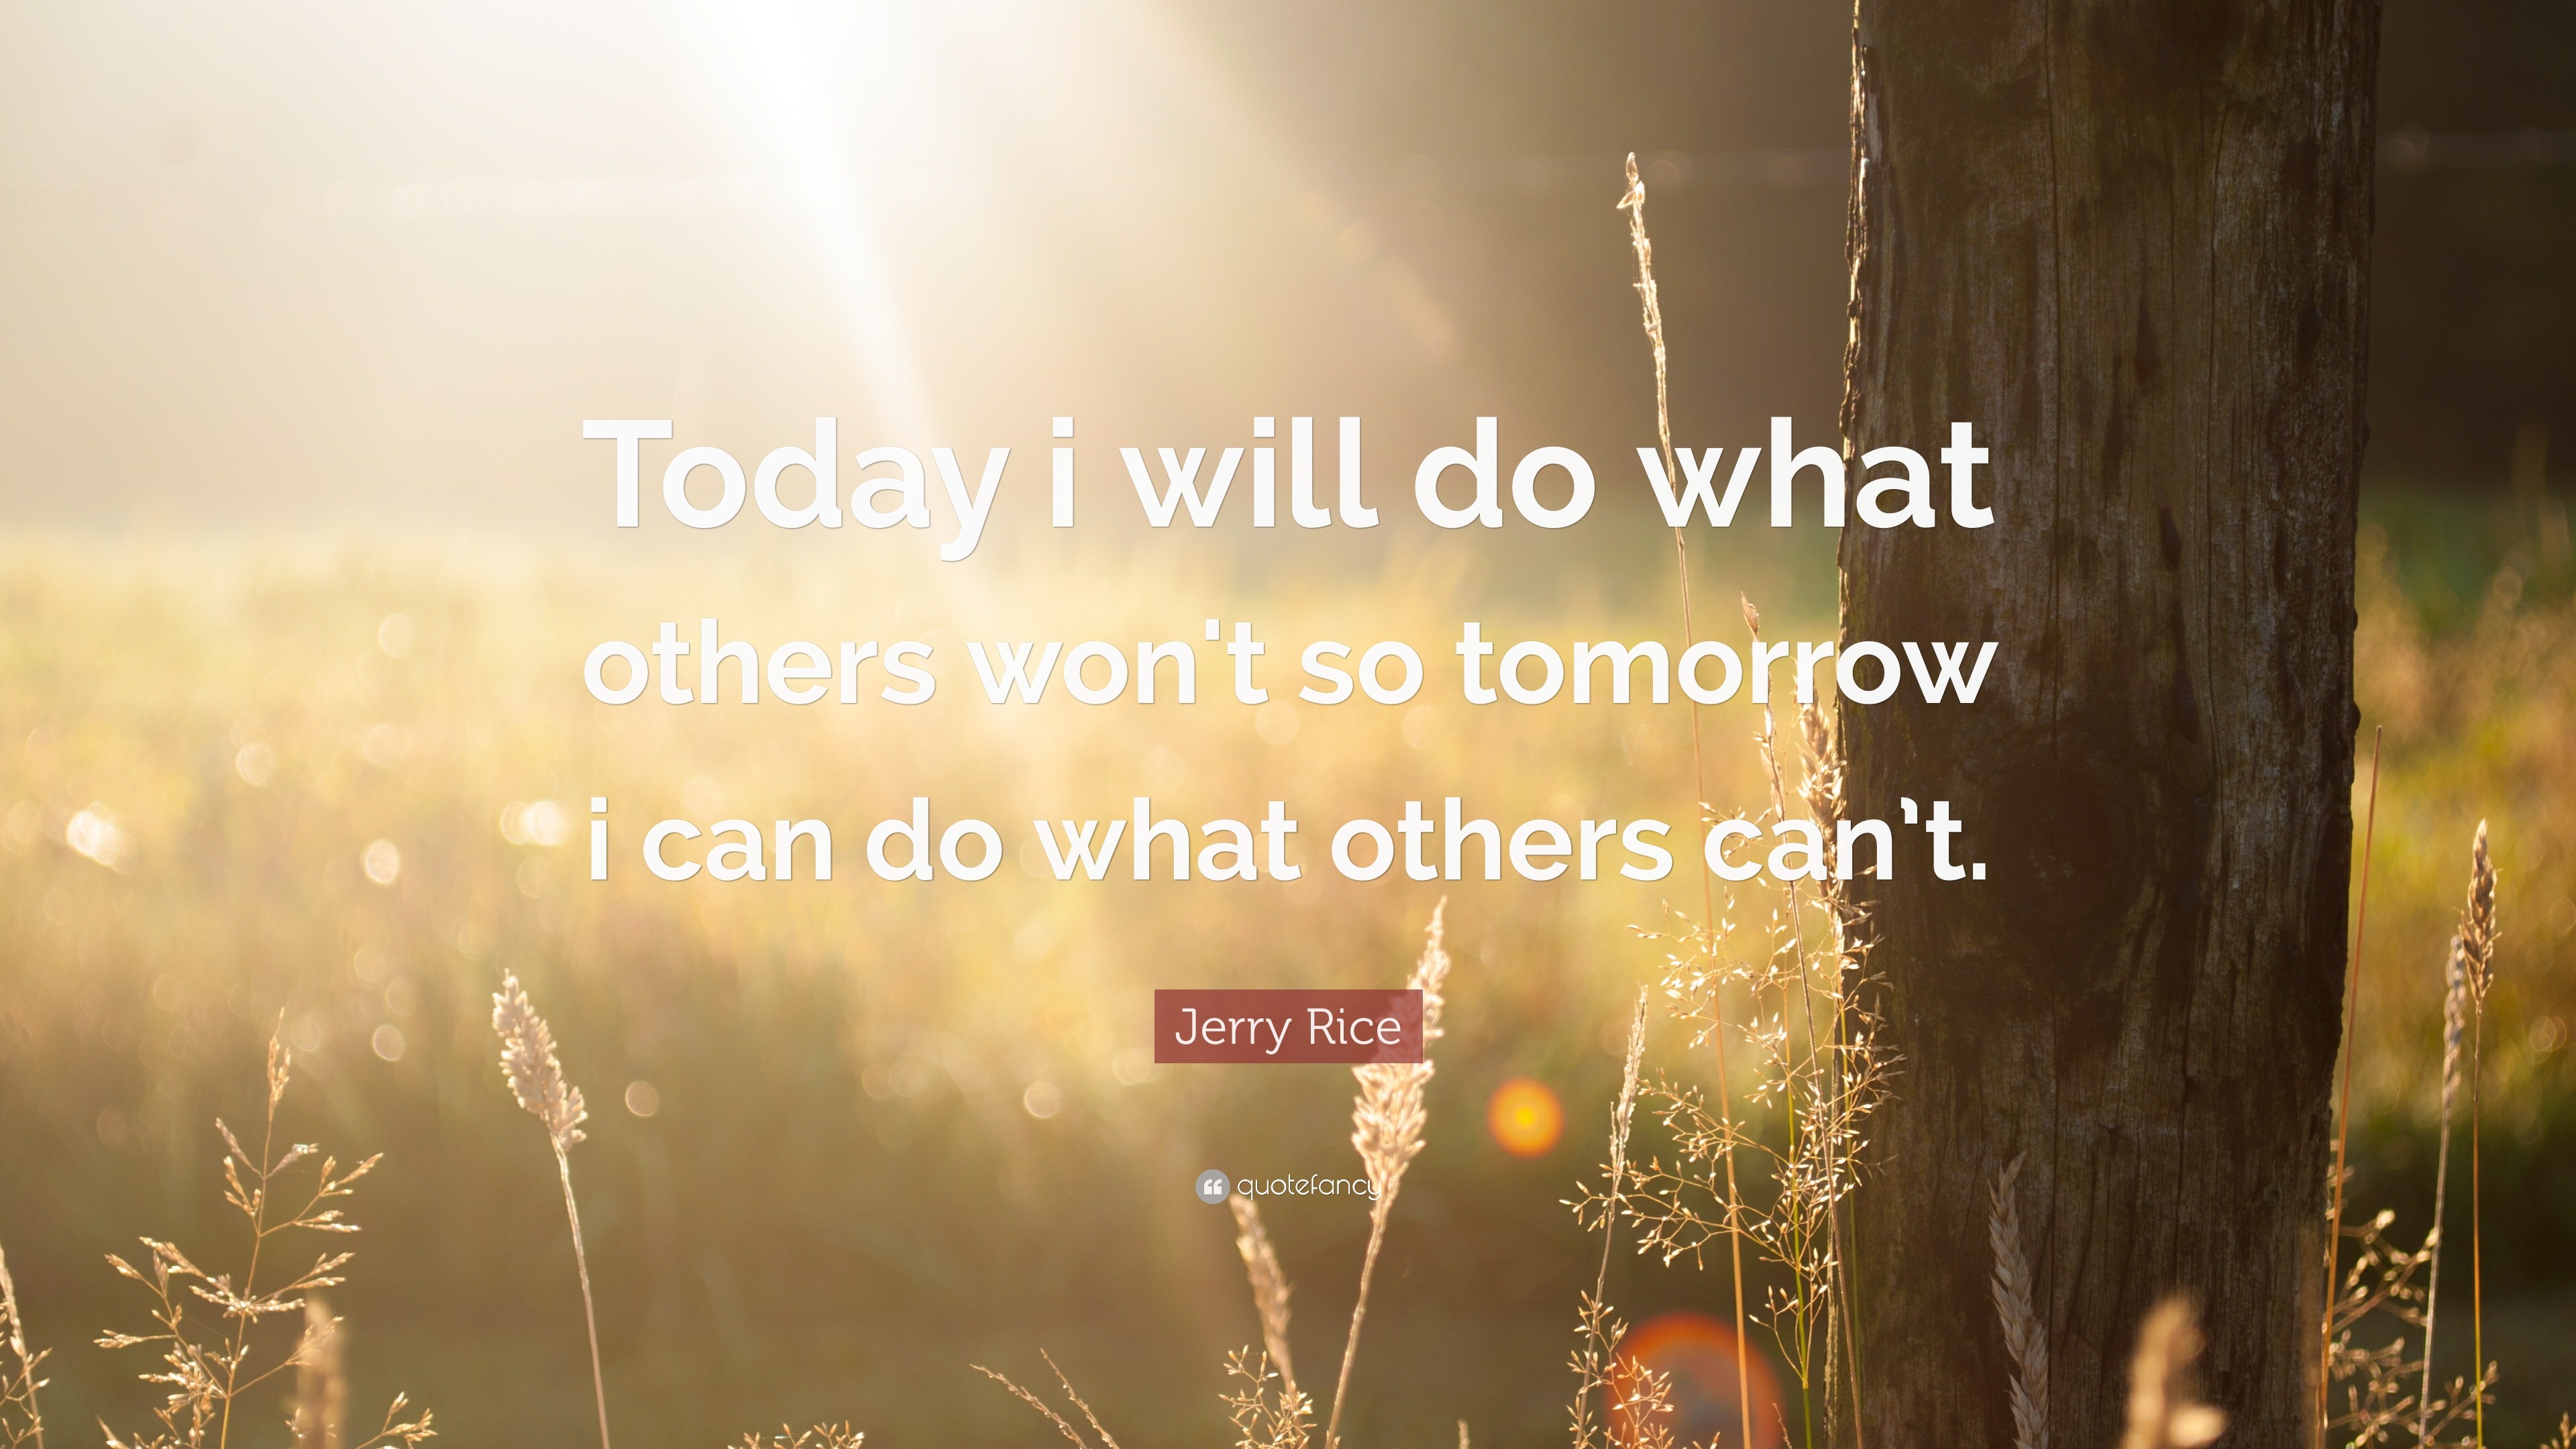 Jerry Rice Quote Today i will do what others wont so tomorrow